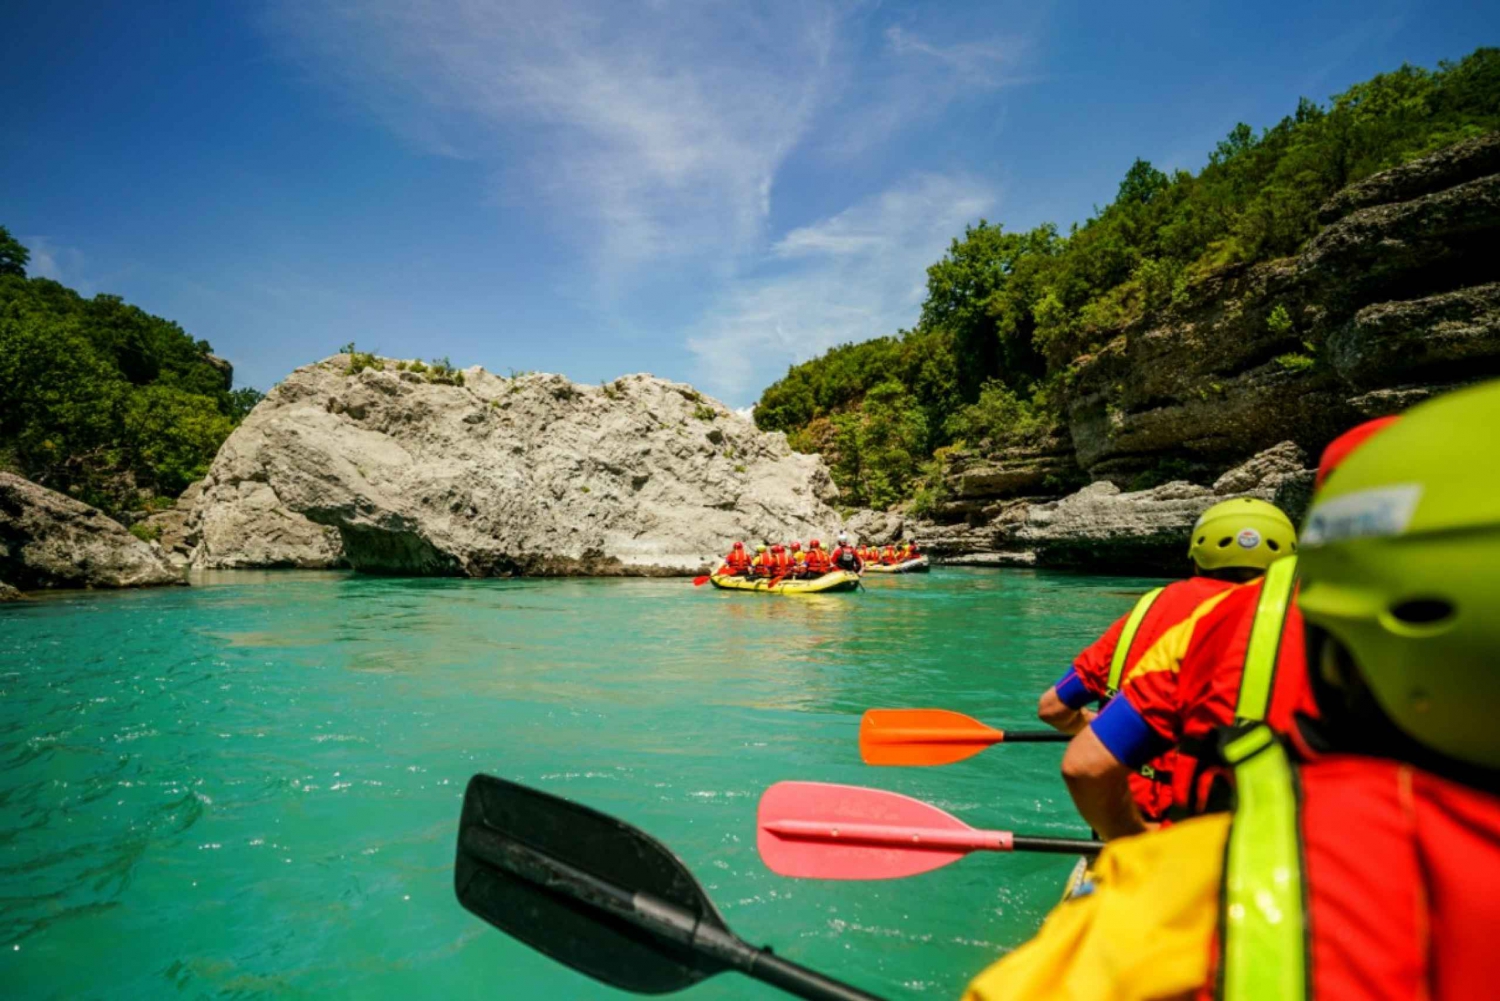 Vjosa Rafting Experience with transfer from Durres